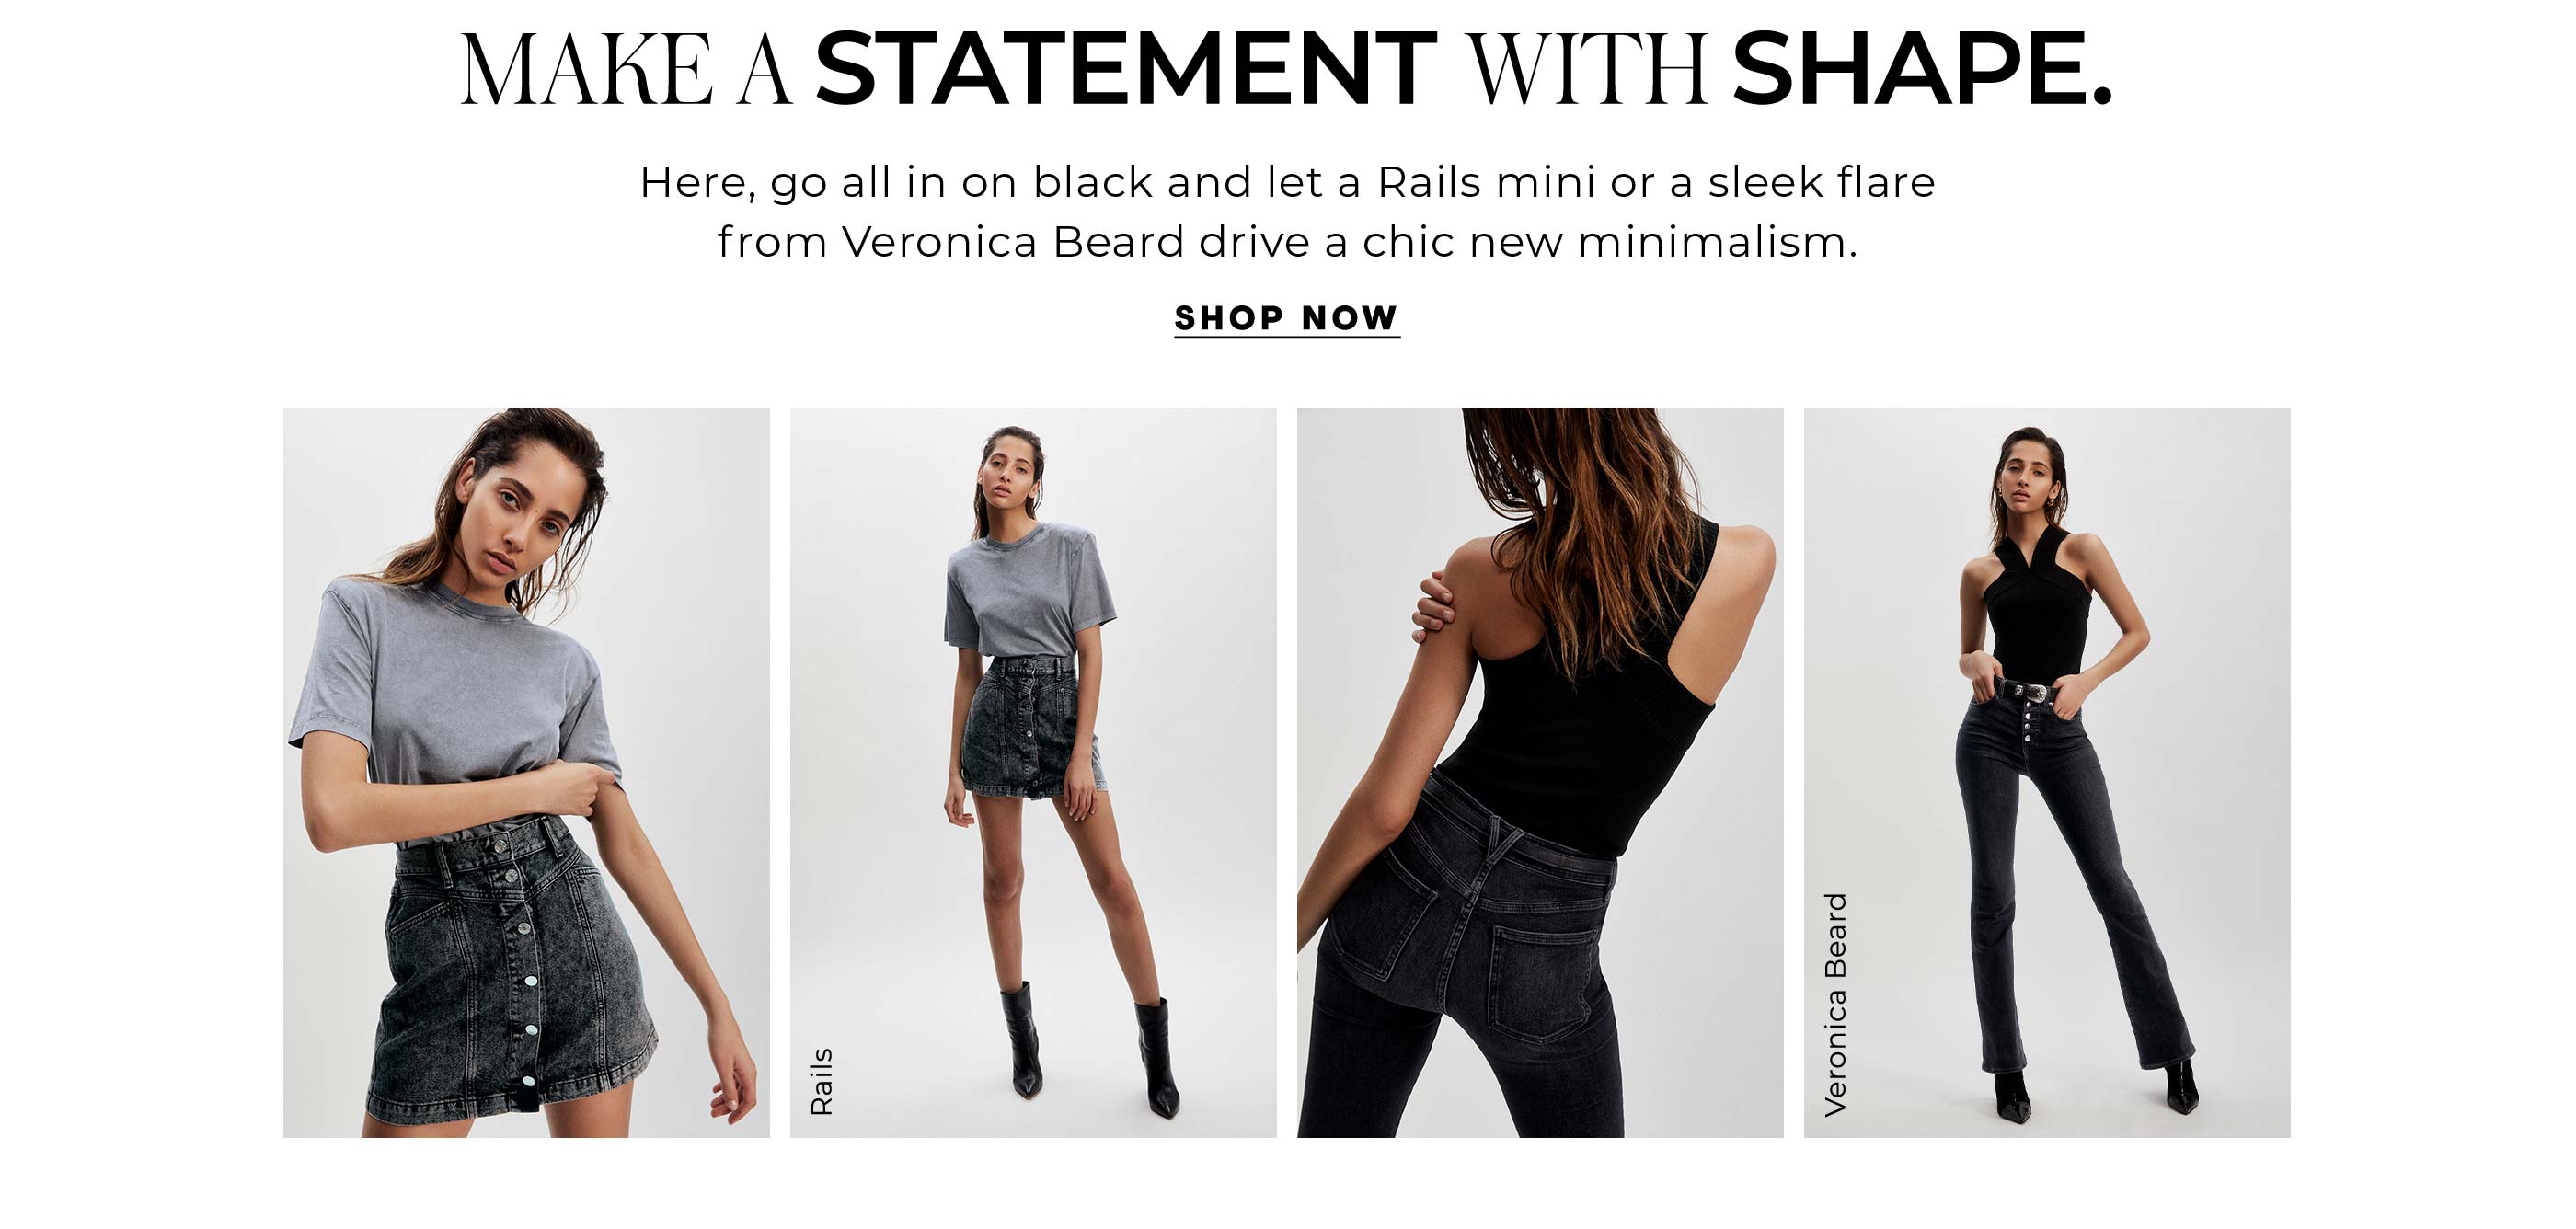 "Make A Statement With Shape. Here, go all-in on black and let a sleek flare from Veronica Beard drive a chic née minimalism."